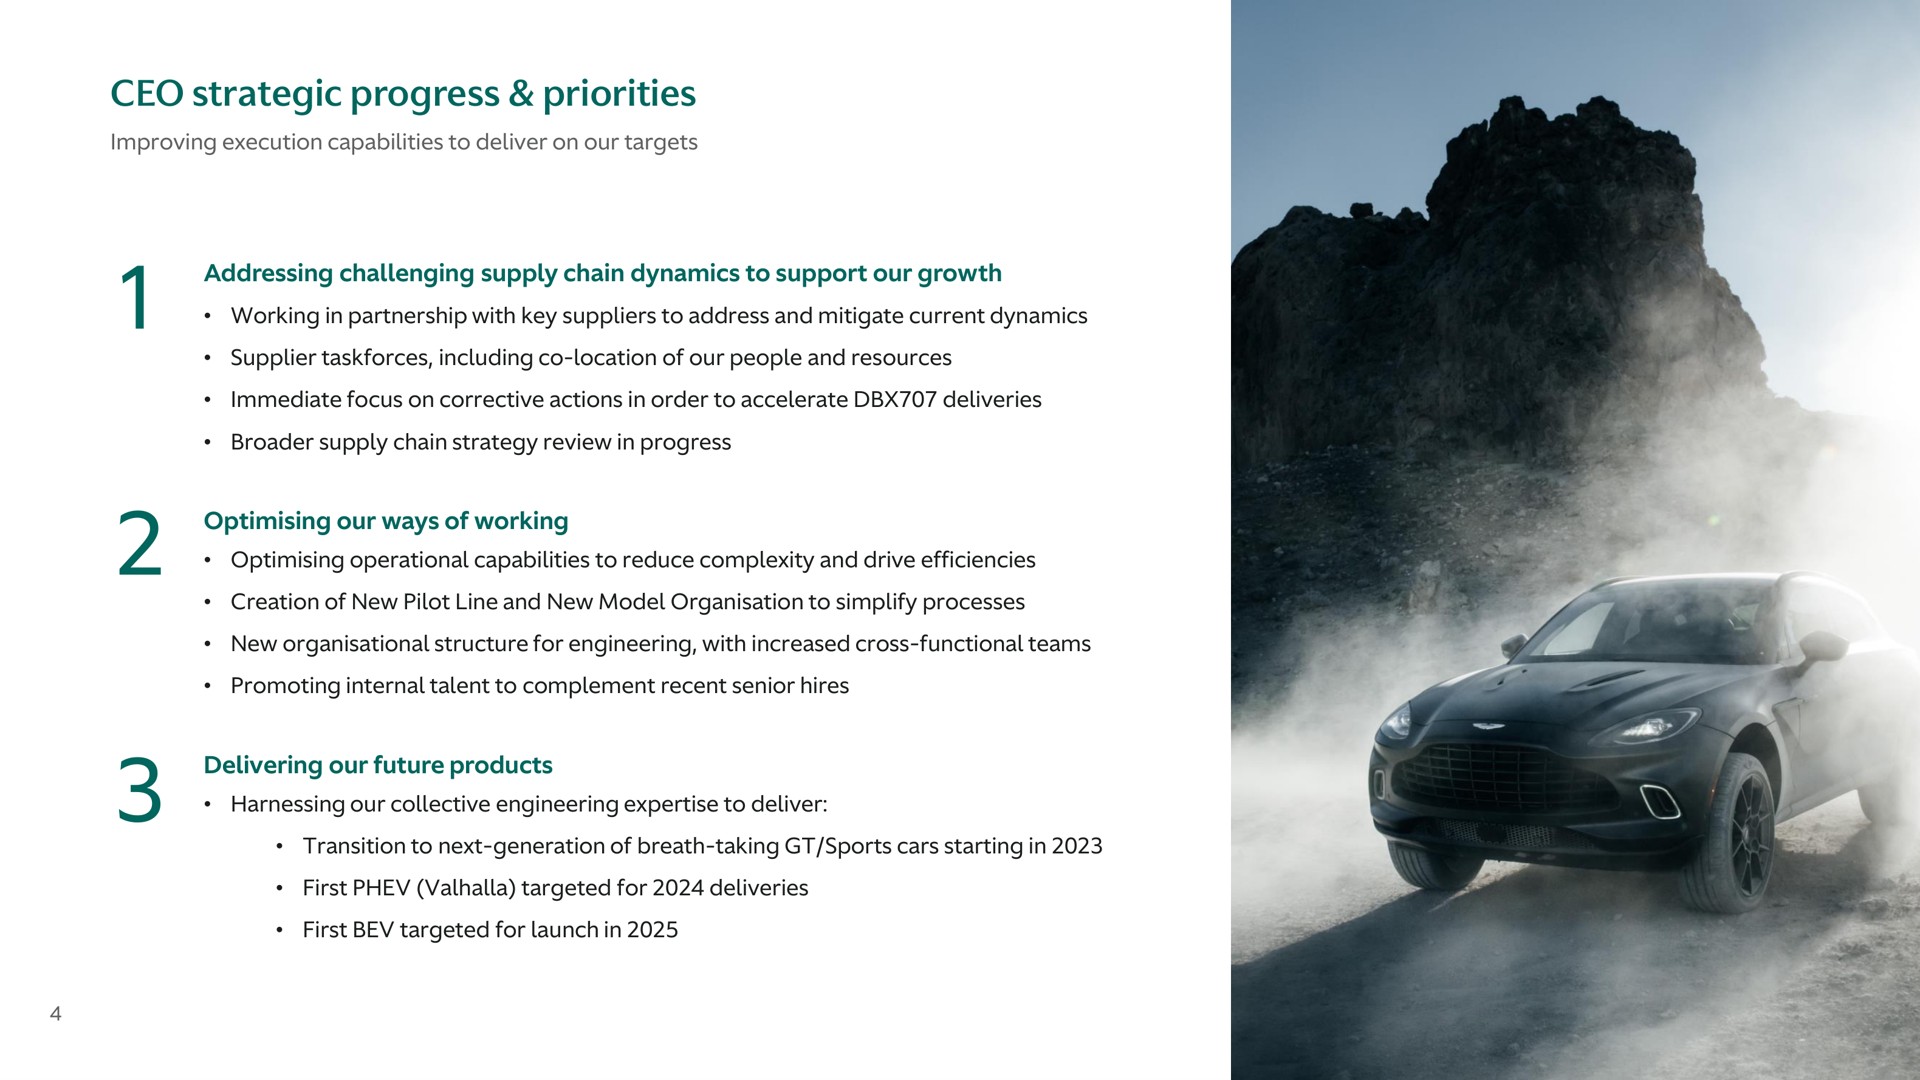 strategic progress priorities addressing challenging supply chain dynamics to support our growth our ways of working delivering our future products | Aston Martin Lagonda